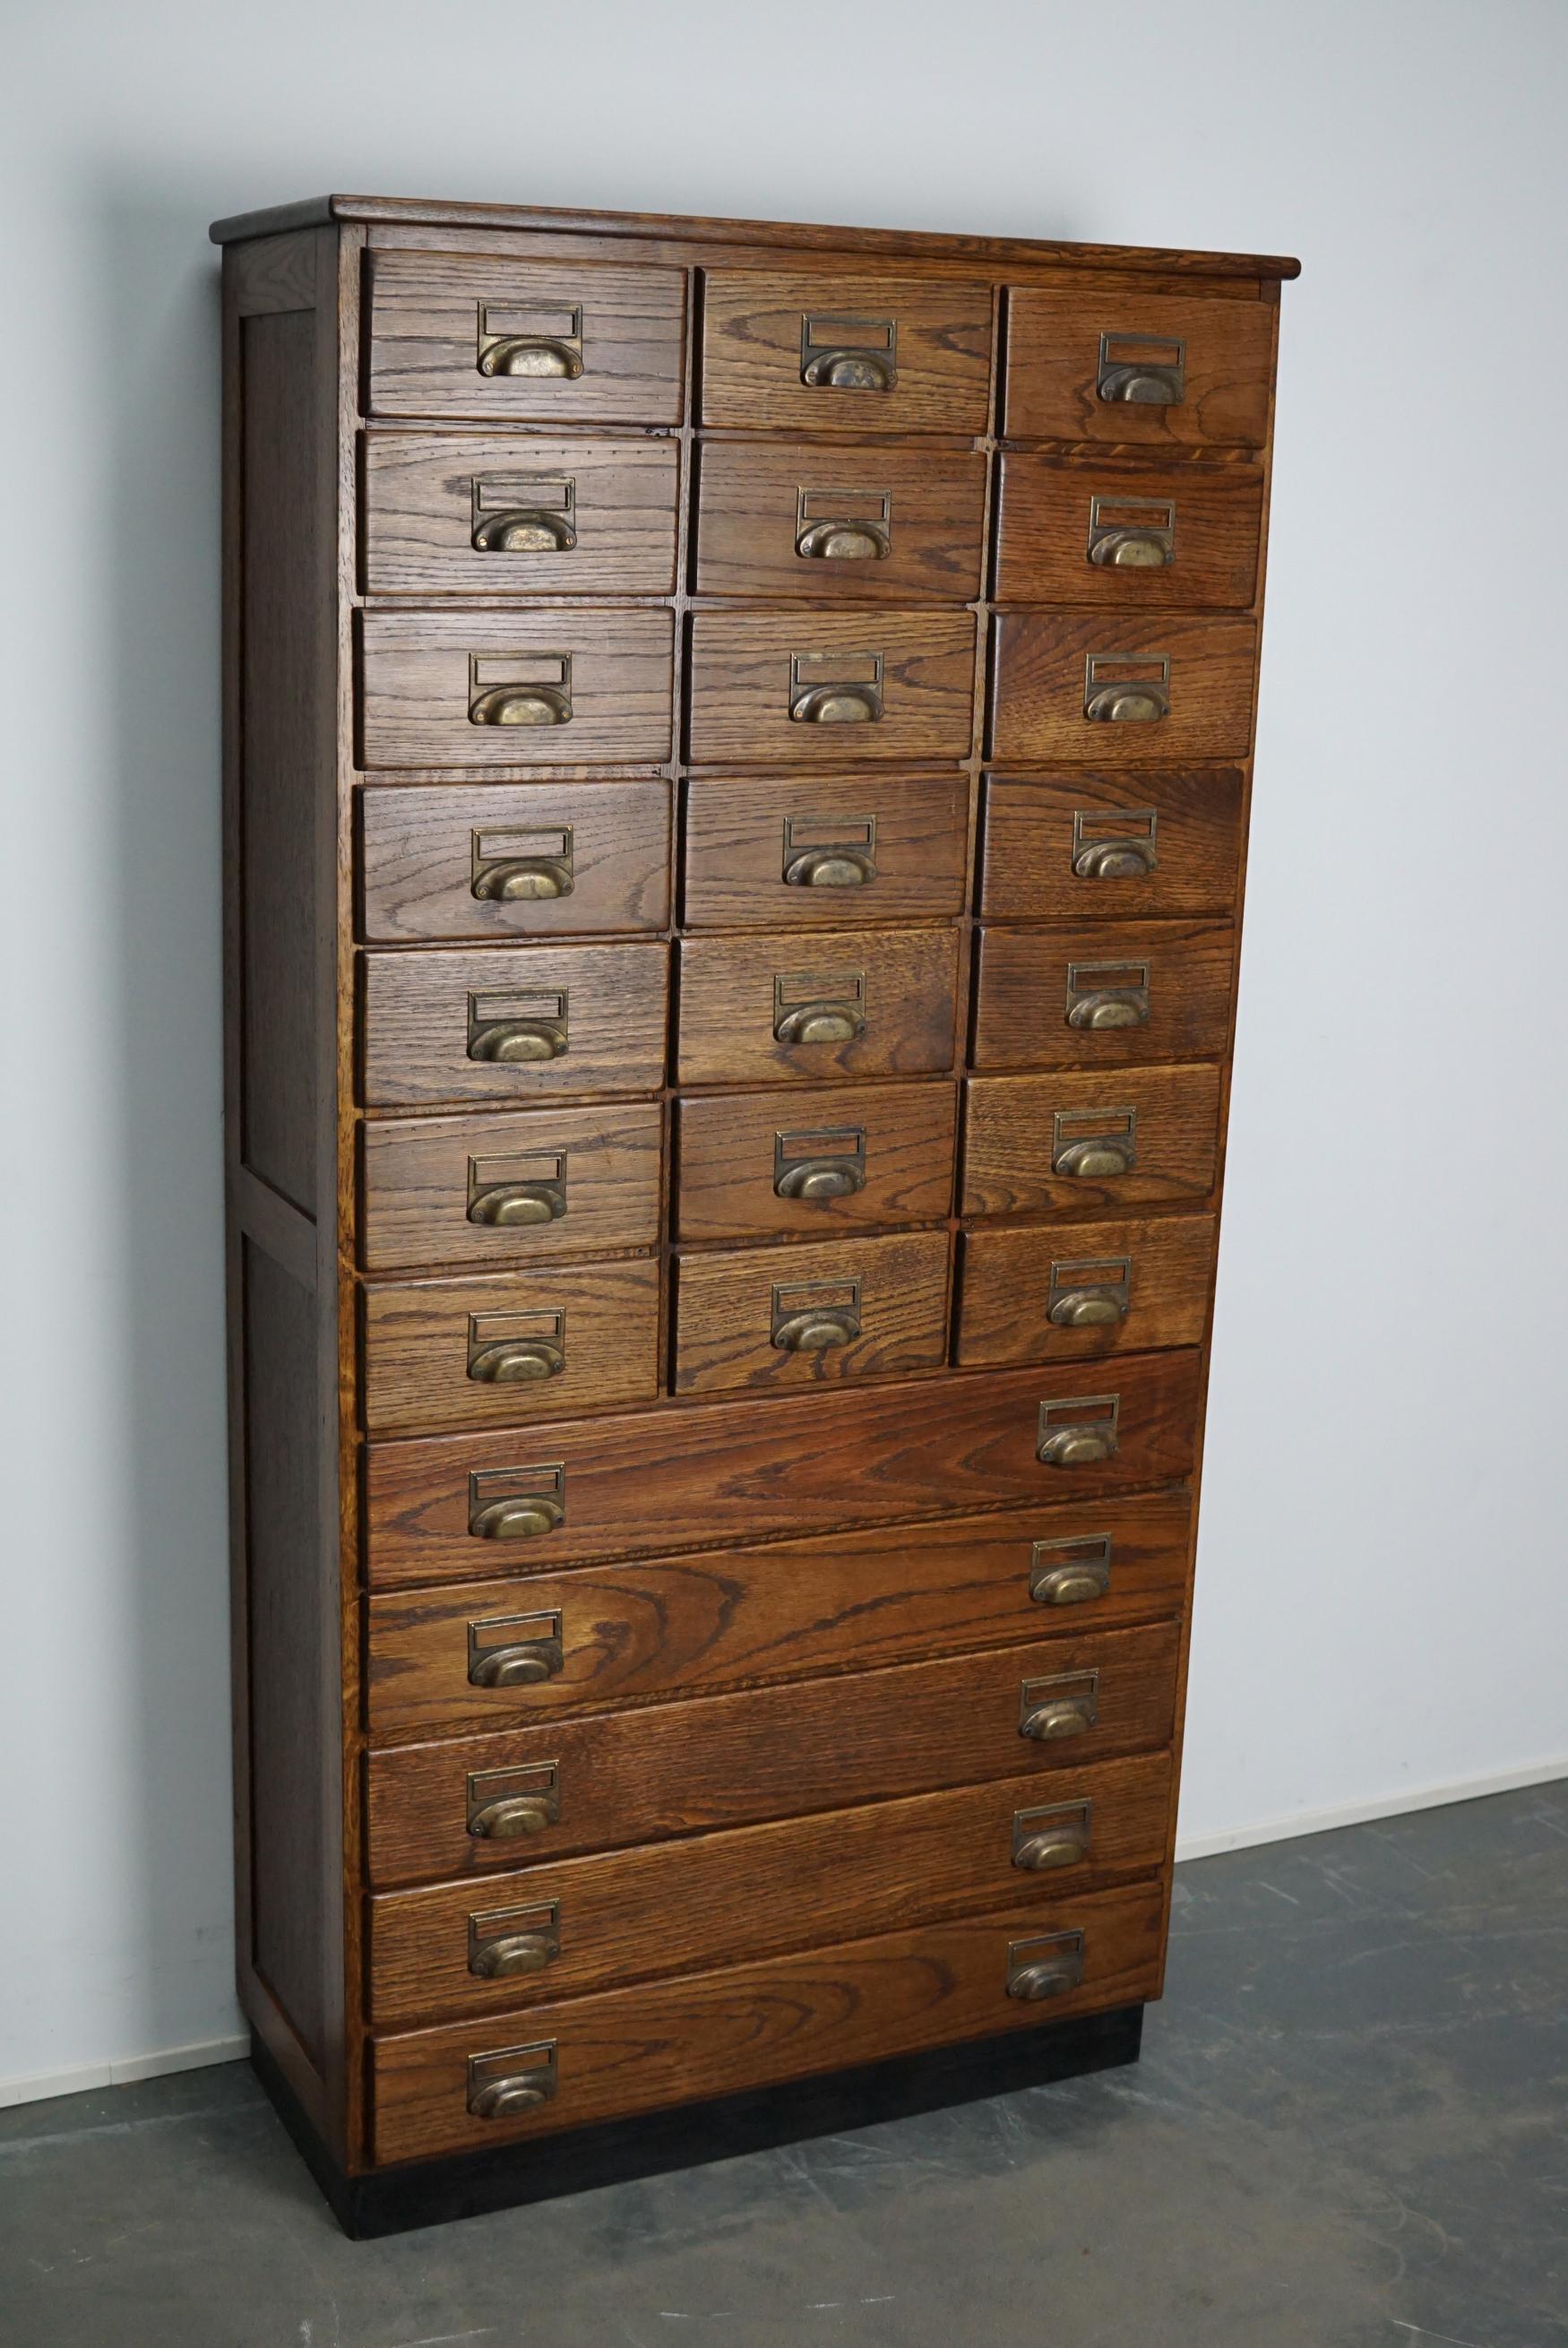 This apothecary cabinet was made circa 1930s in the Netherlands and restored at a later period in time. It features 26 drawers with nice brass handles. The interior dimensions of the drawers are: D x W x H 23 x 19 x 8.5 cm and 28 x 69 x 9 cm.